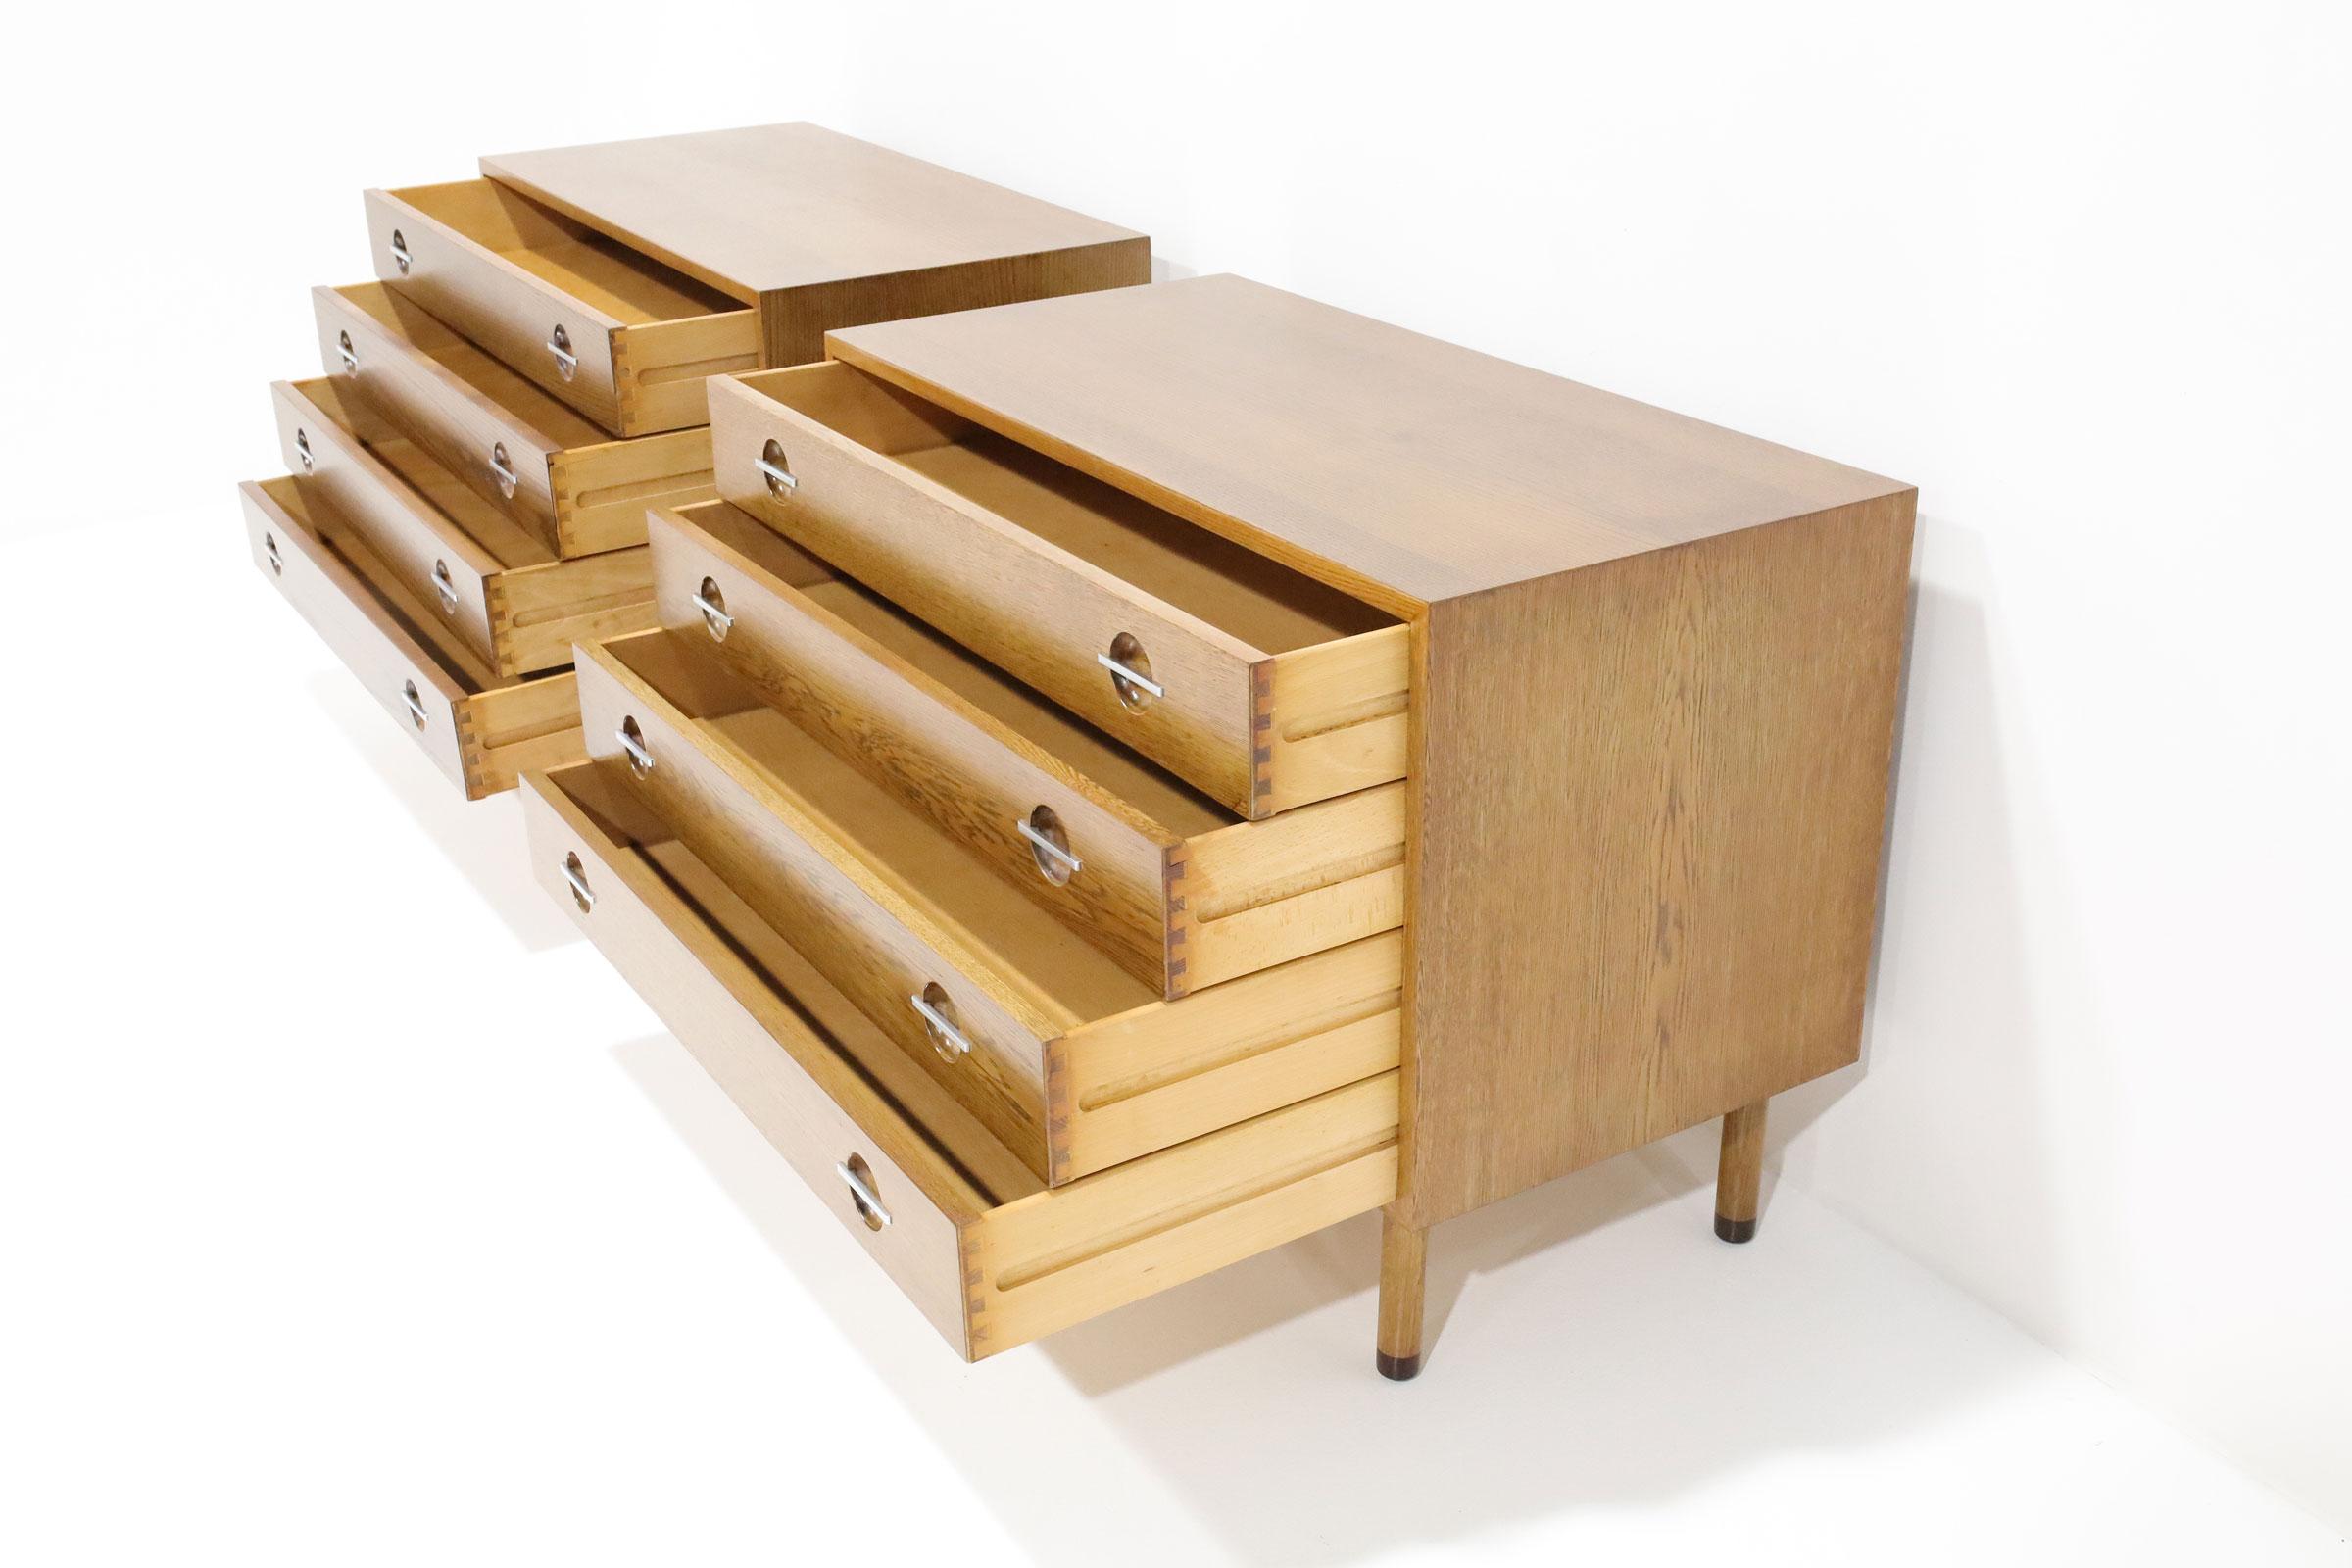 A beautiful pair of nightstands or chests of drawers designed by Hans Wegner for Ry Mobler. These were imported to the USA by George Tanier who only imported the finest furniture pieces. 